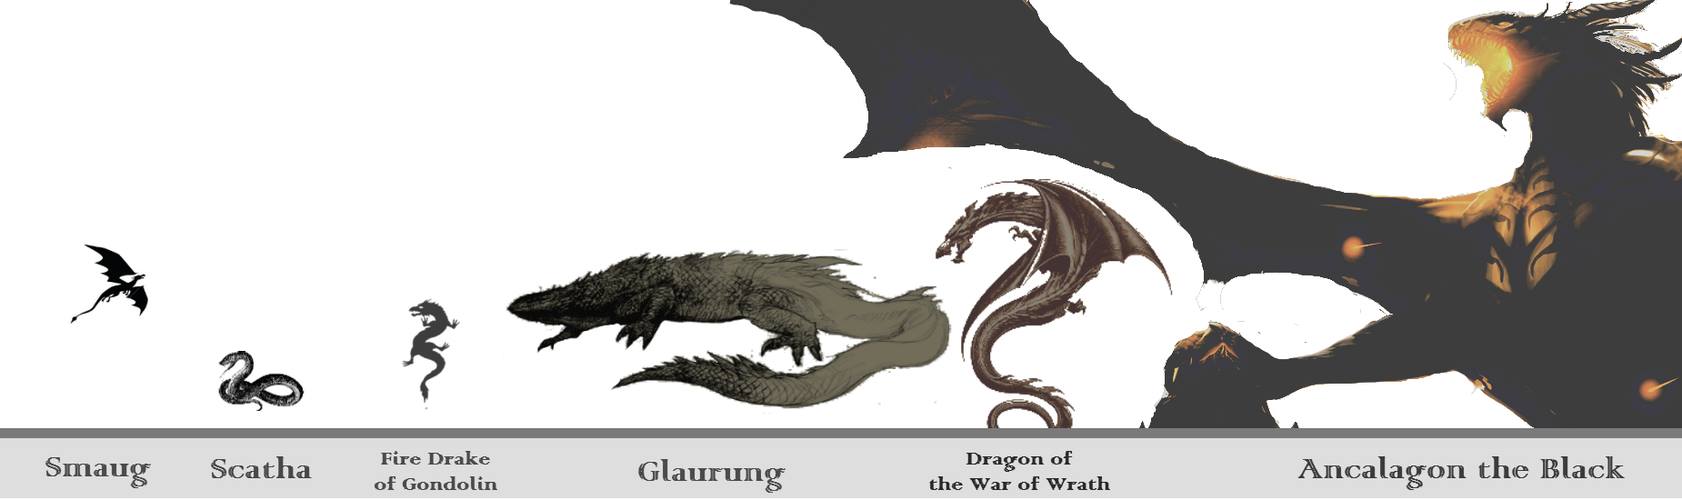 Dragons_of_Middle_Earth.jpg